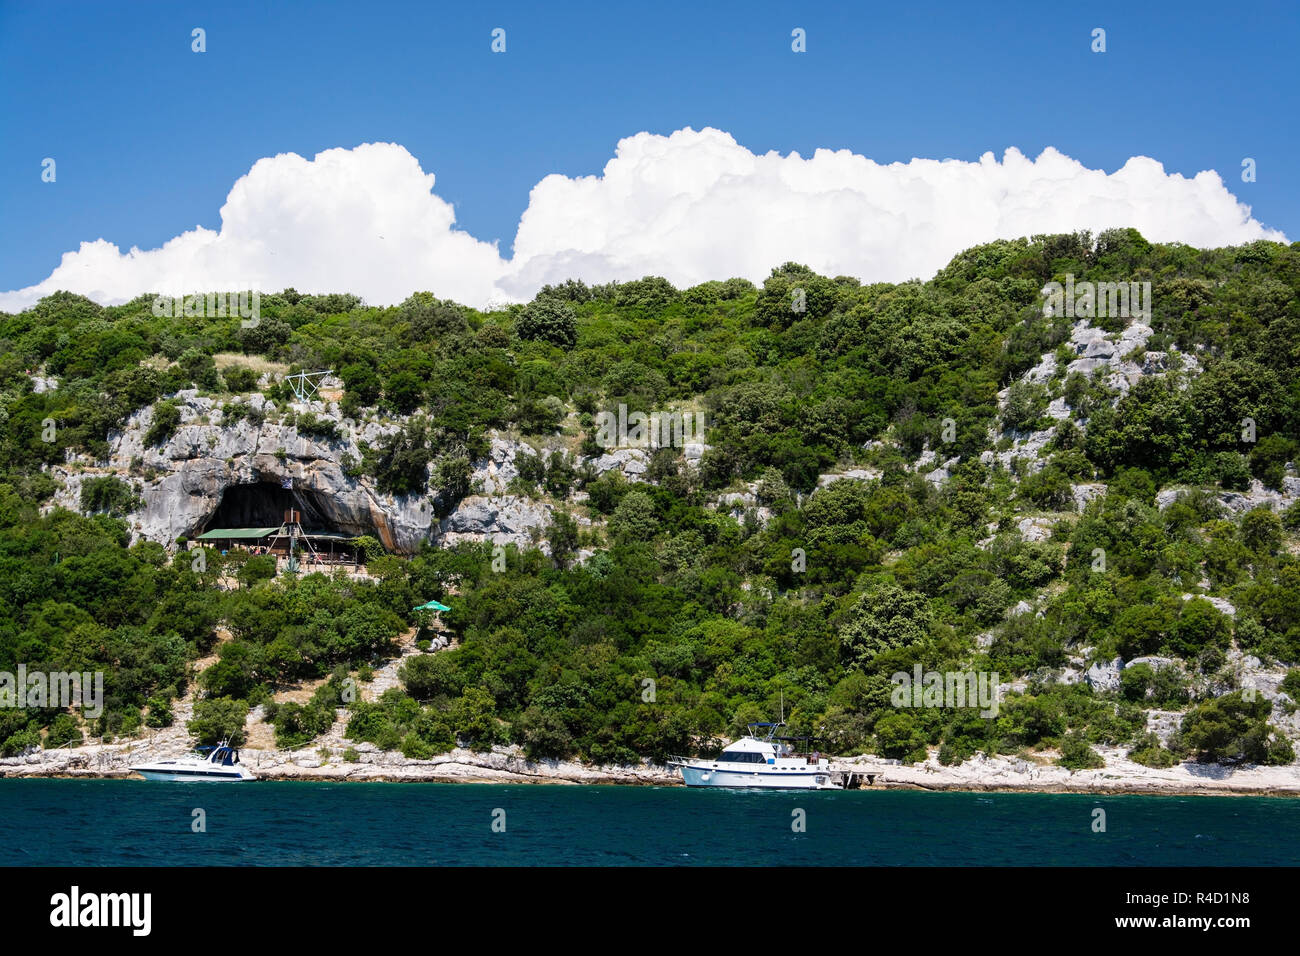 The Lim bay and valley is a peculiar geographic feature on the western coast of Istria, Croatia. Stock Photo